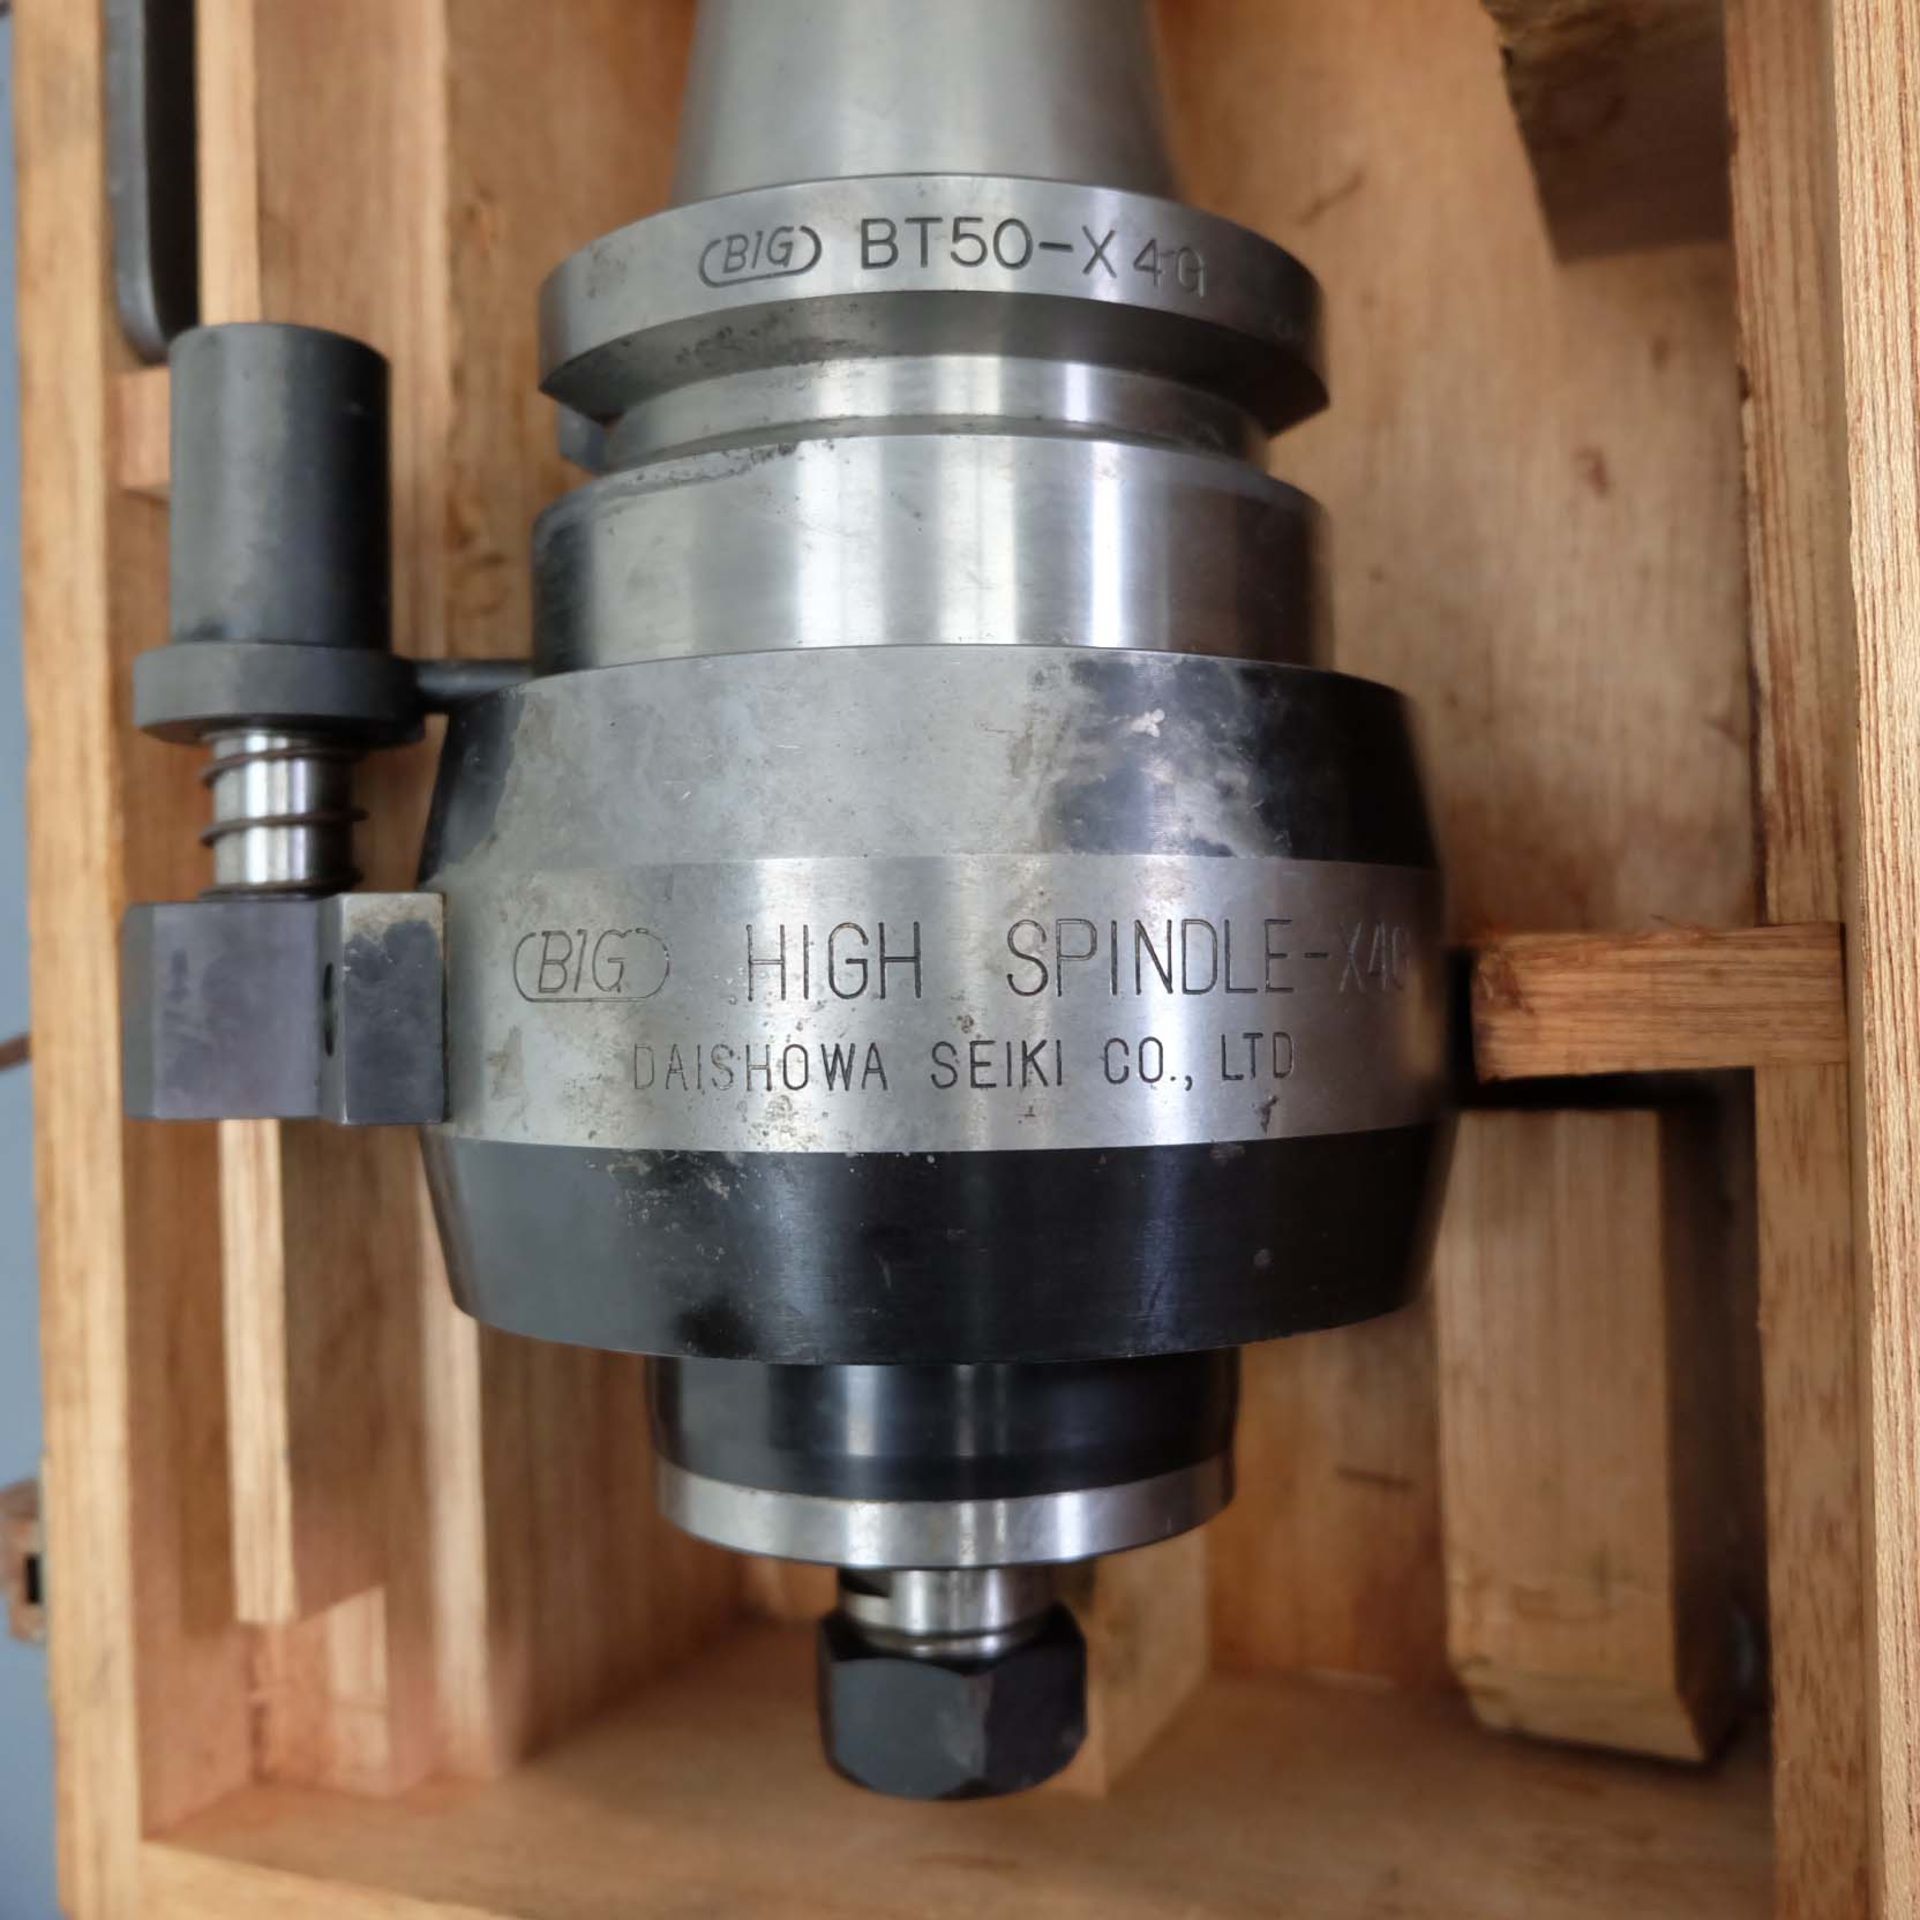 BIG High Spindle Speed Increaser - X4G By Daishower Seiki Co. Ltd With BT 50 Spindle In Wooden Box. - Image 2 of 5